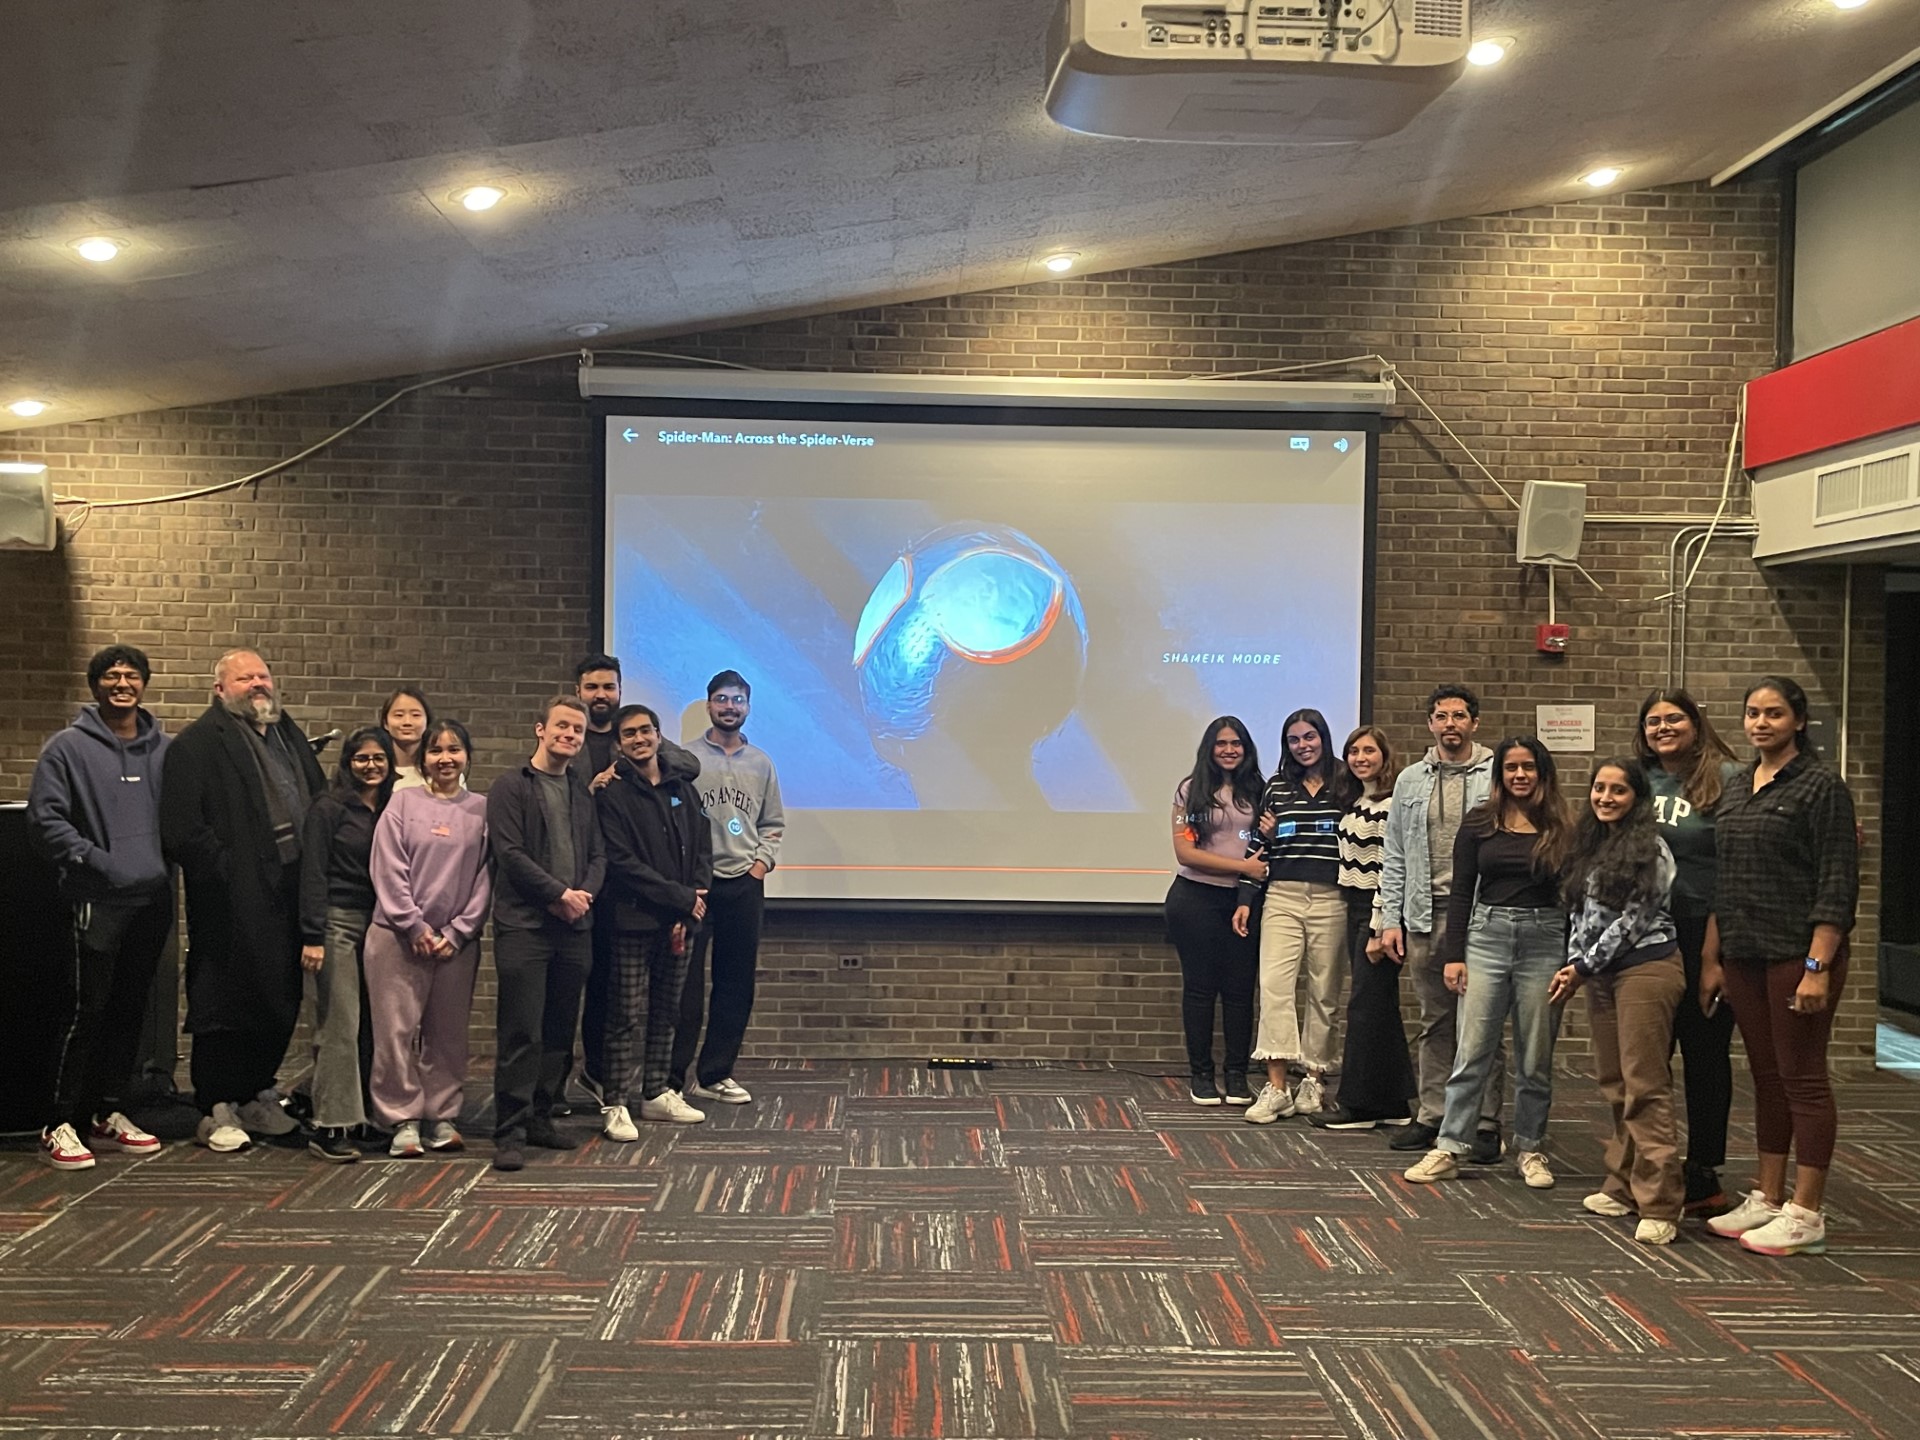 Group of students standing in front of projection screen with movie playing